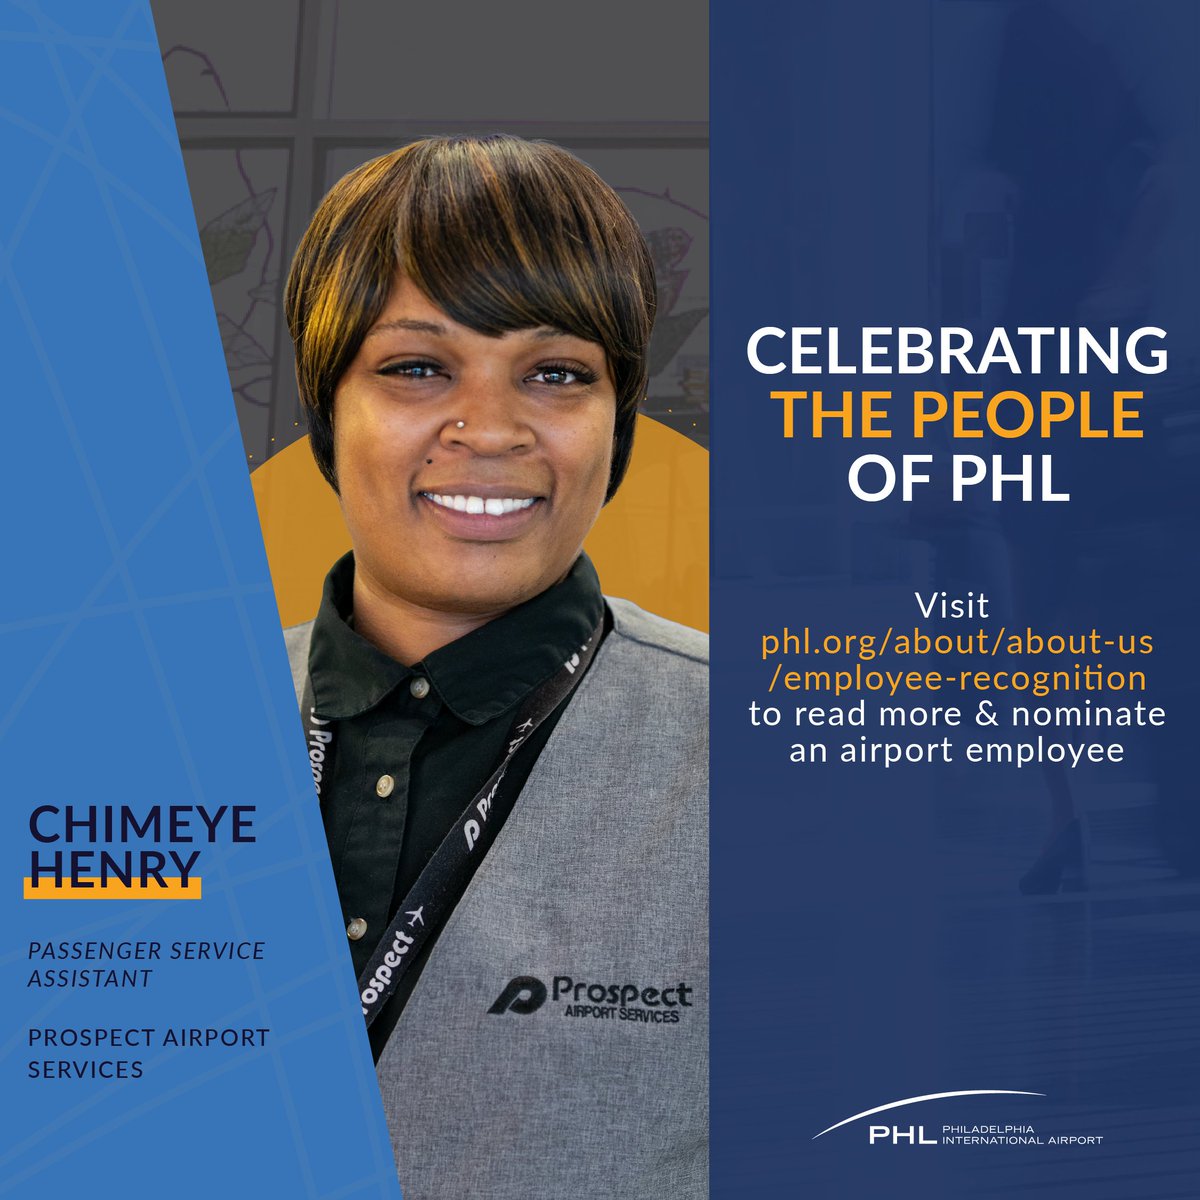 Prospect Passenger Service Assistant Chimeye Henry received #PHLAirport's Caring Support Employee Recognition award. “The most meaningful part of my job is ensuring that I’m providing the best service possible, that I worked to my full potential.” More: phl.org/newsroom/profi…